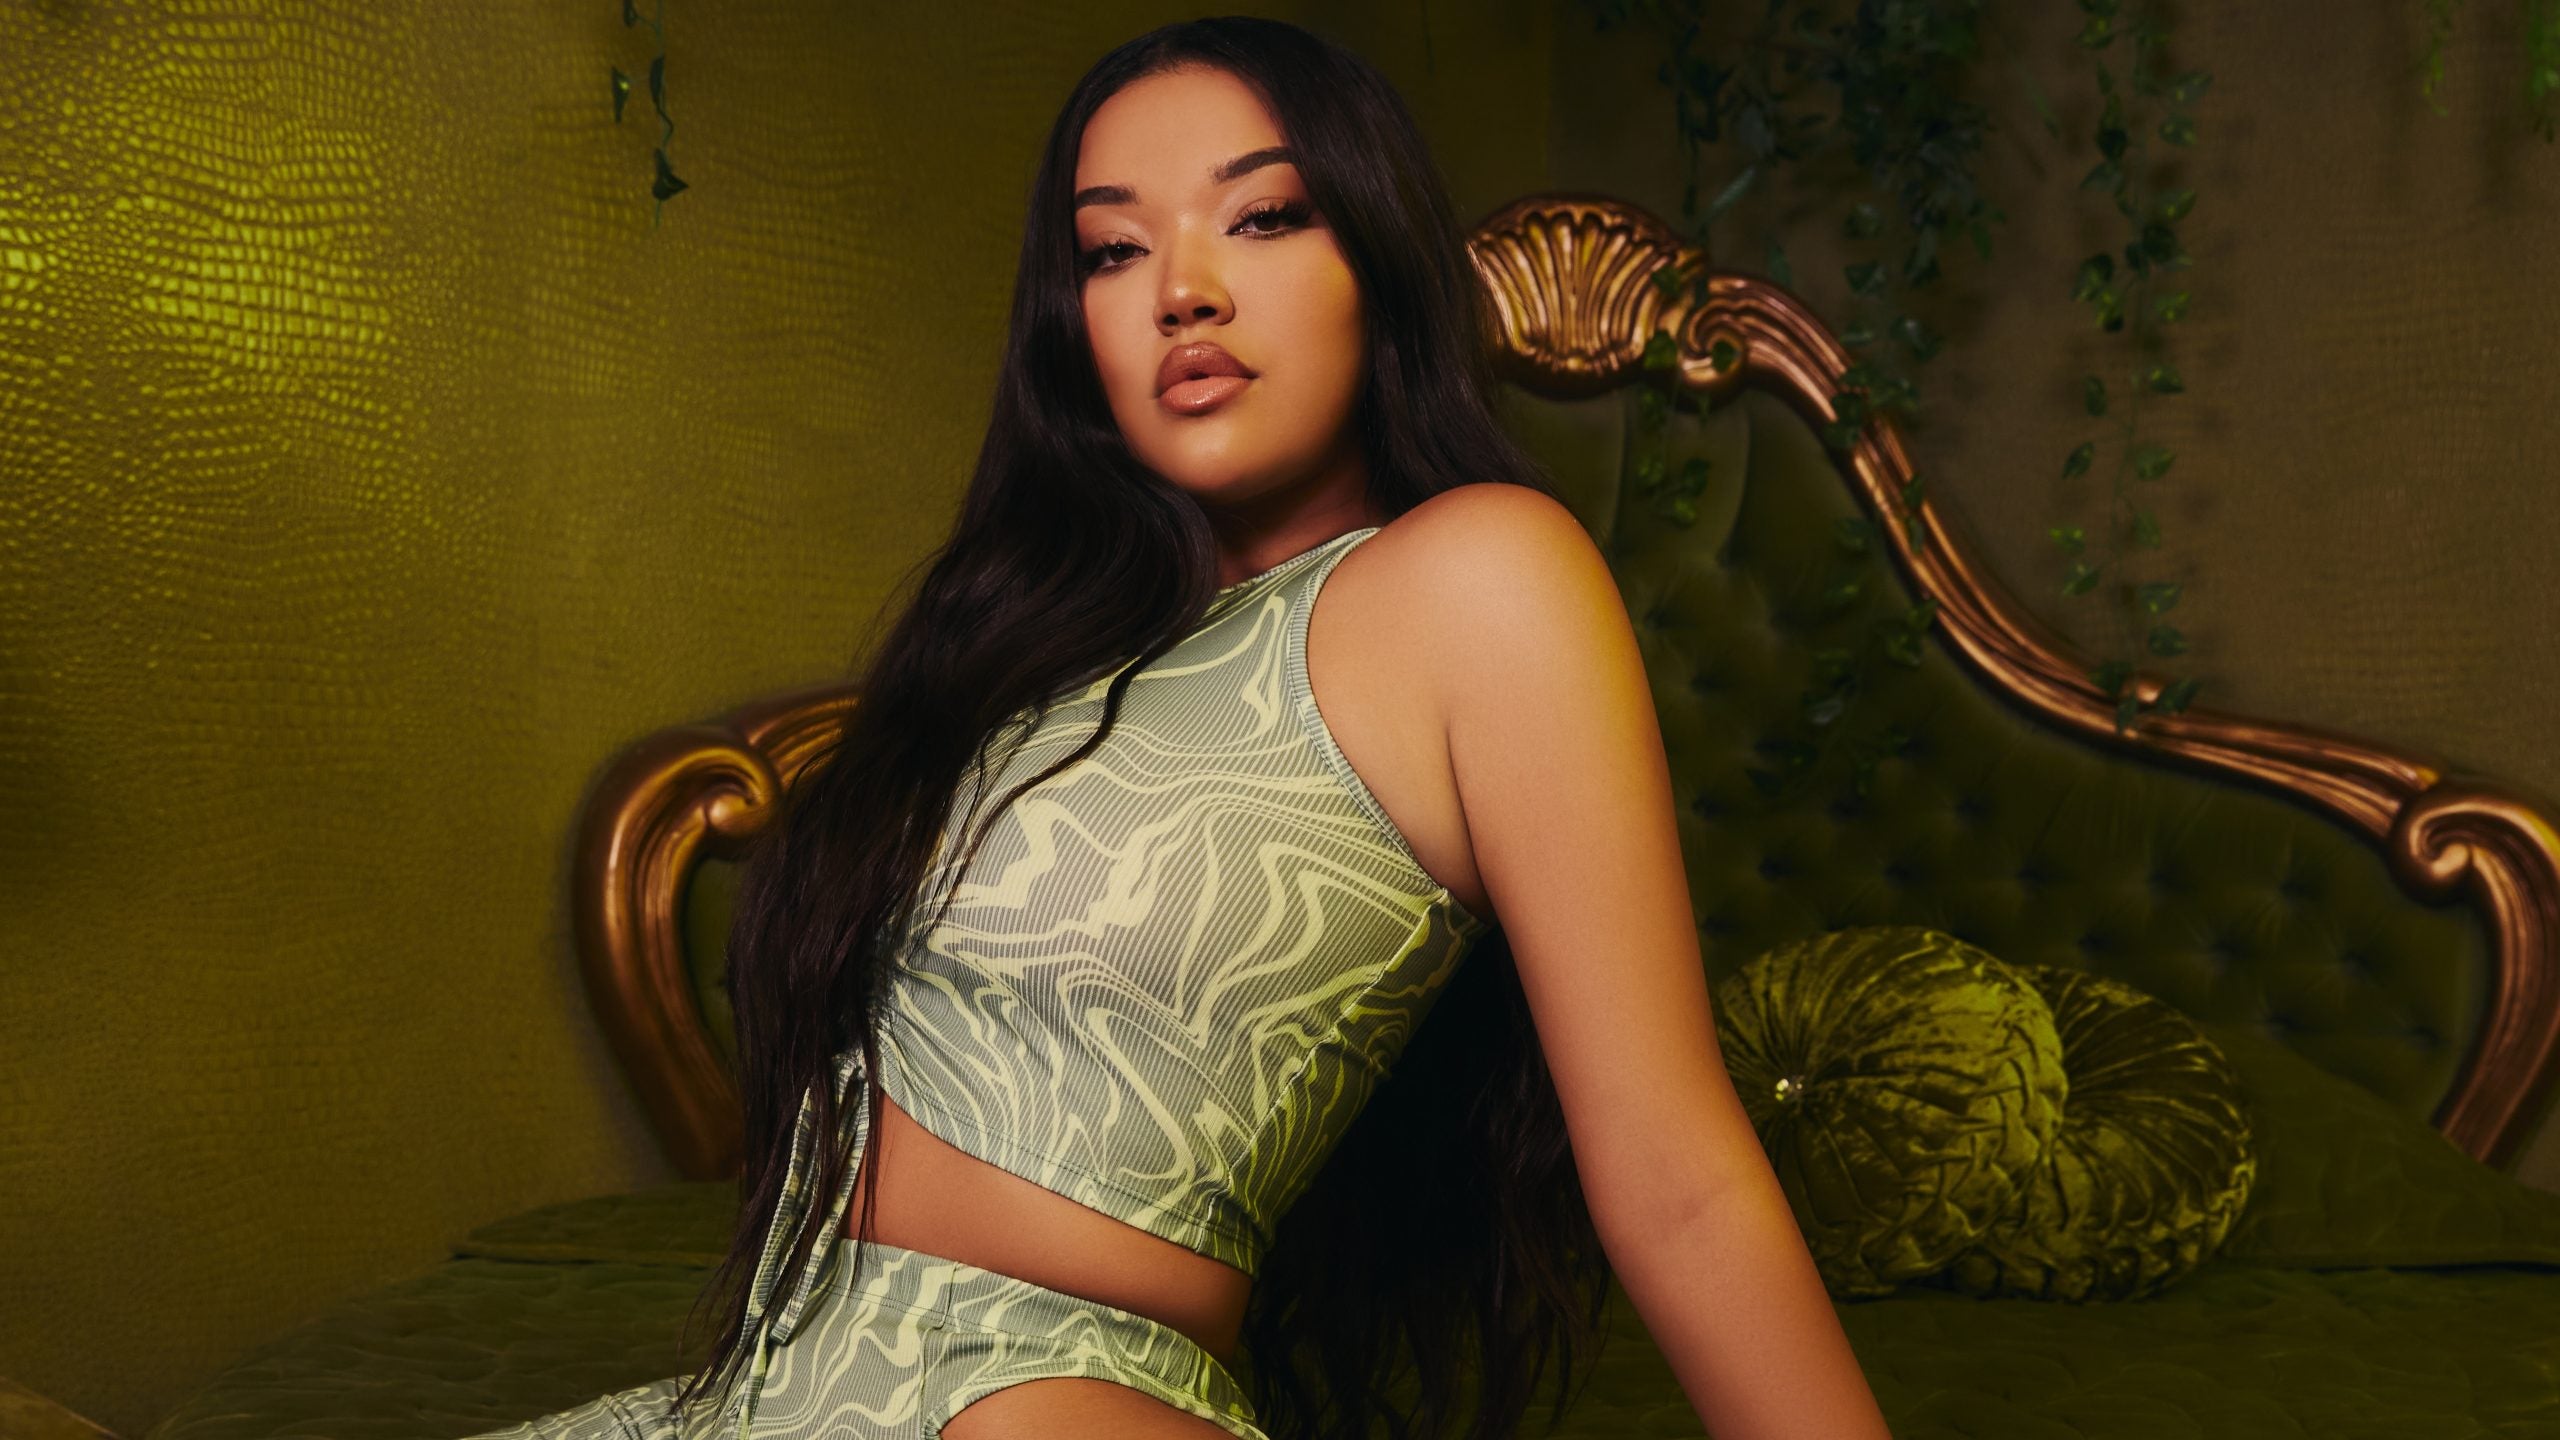 Ming Lee Simmons Flexes Her Fashion Design Skills With A Debut 40-piece Collection With Boohoo